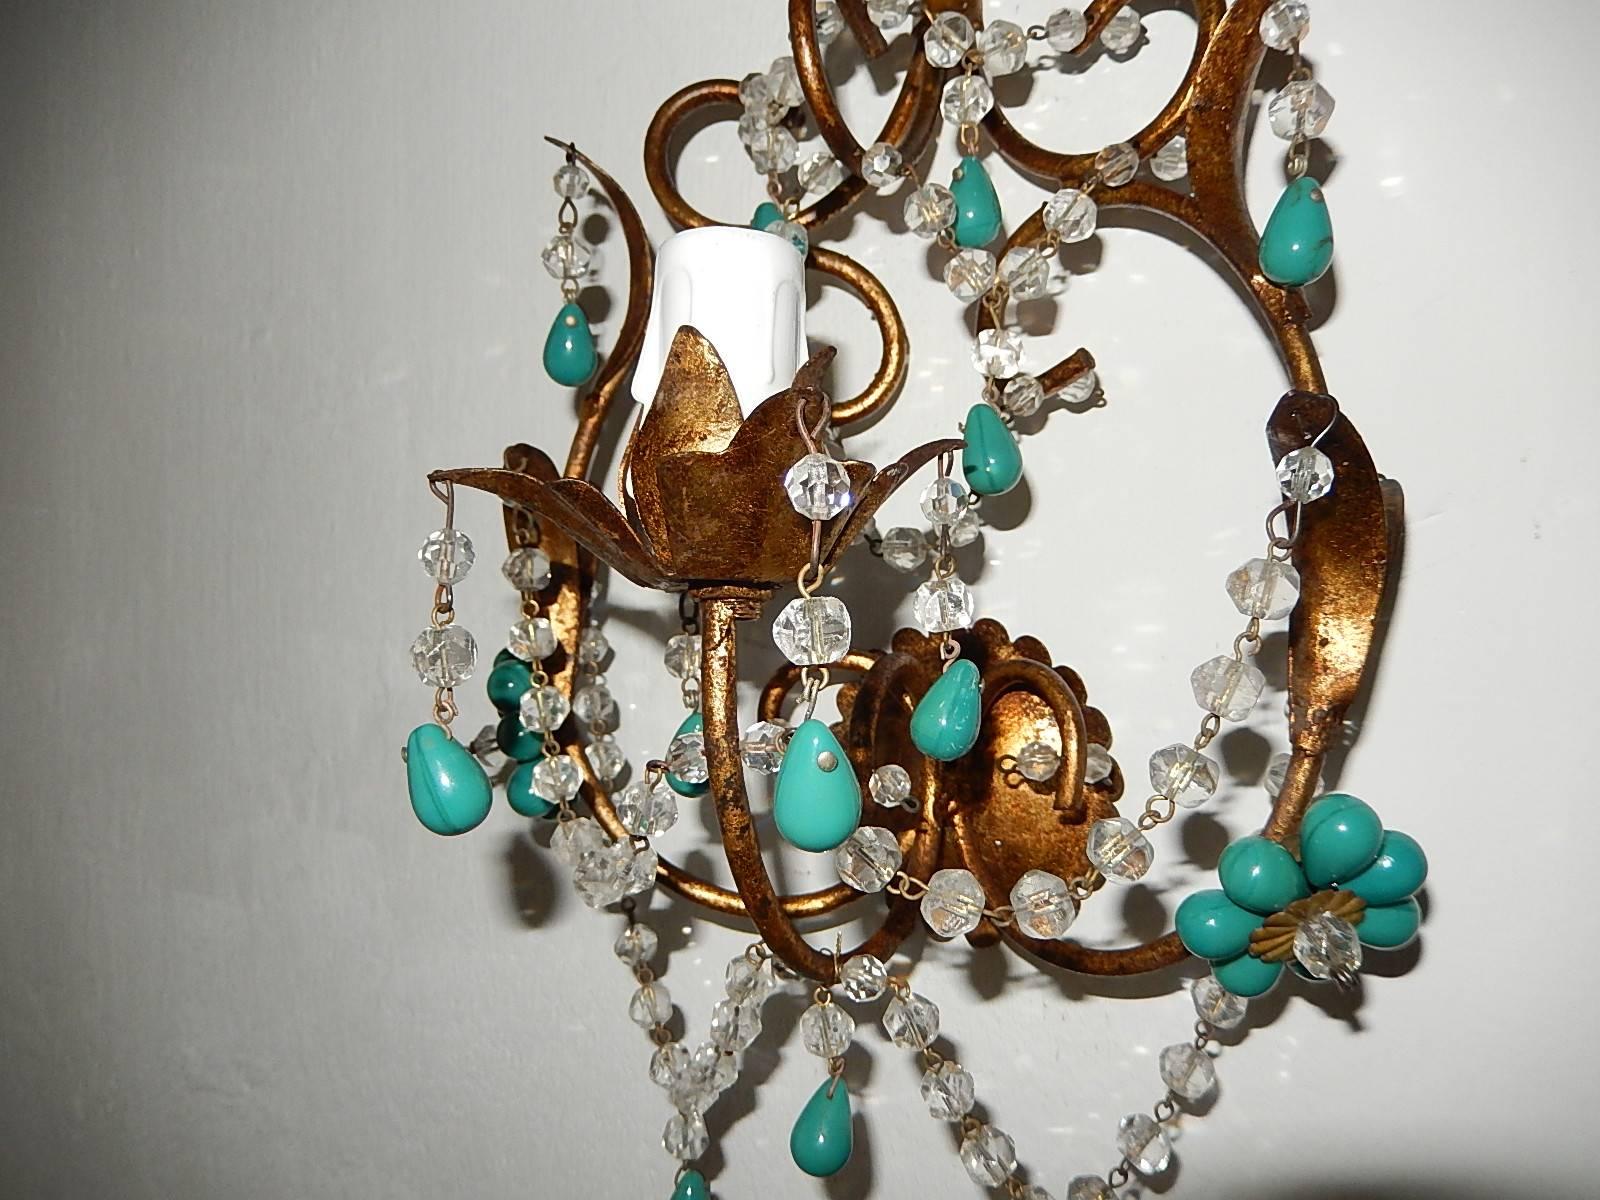 French Turquoise Green Murano Beads Rock Crystal Swags Sconces 1